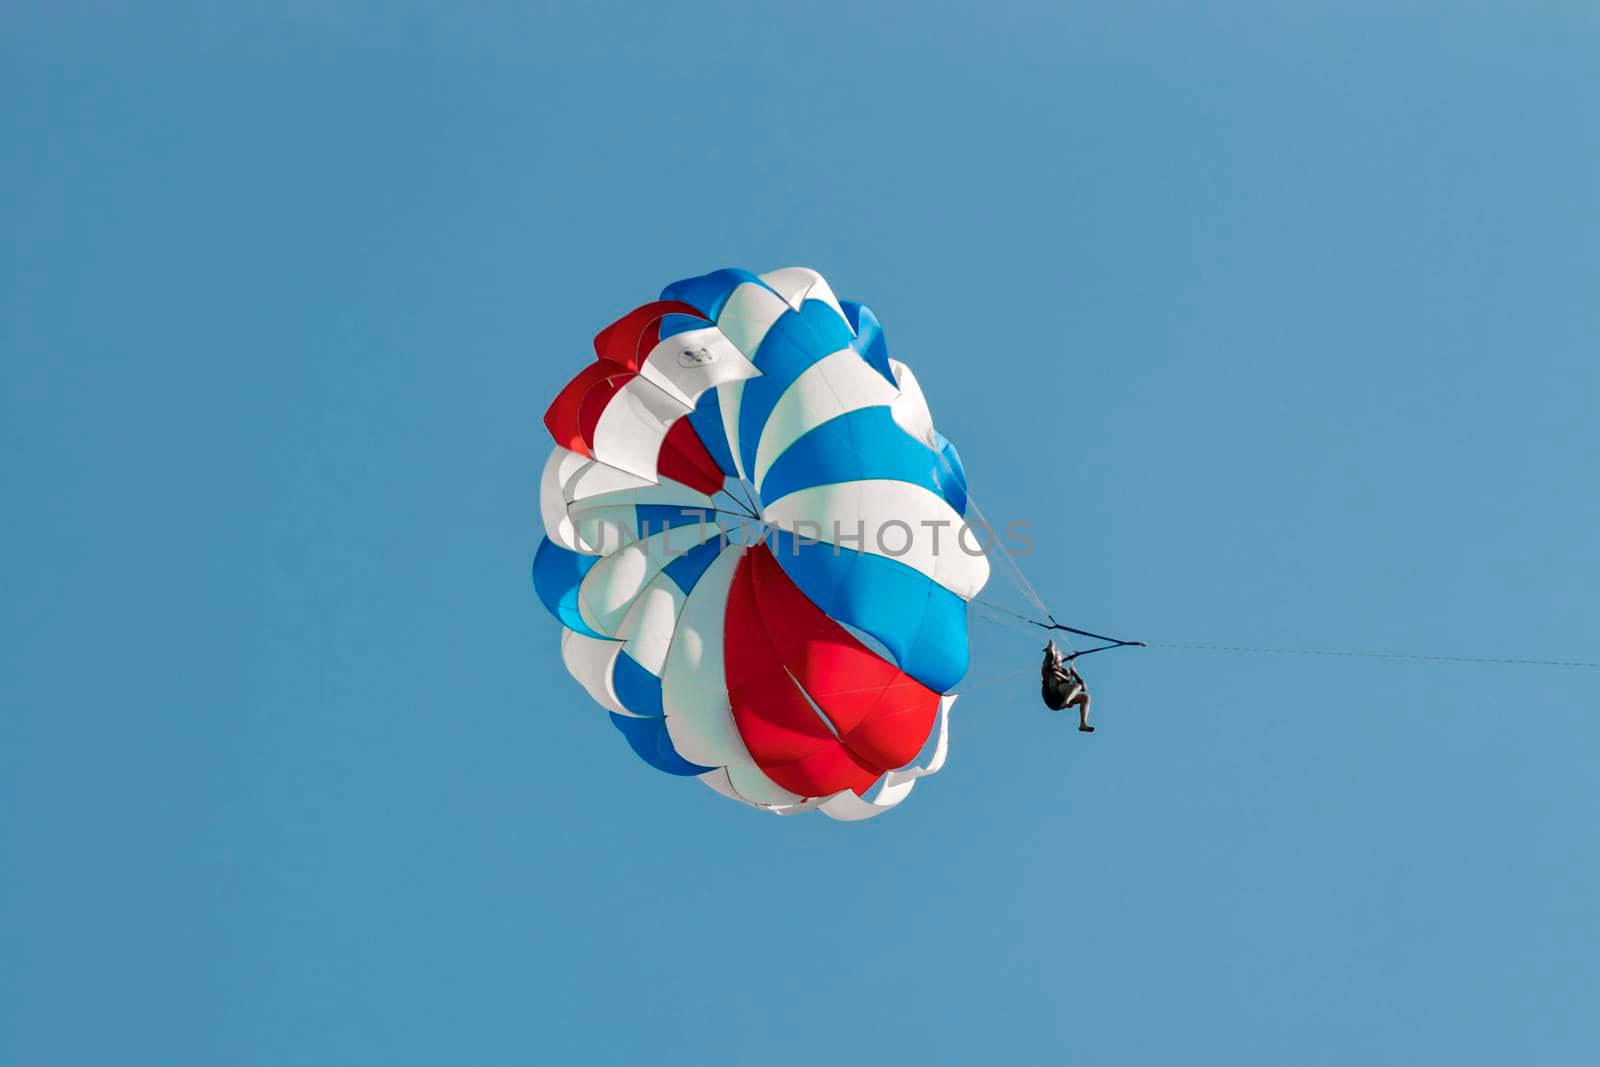 Parasailing people against a blue sky on black sea. Sunny summer day. Side view. Crimea, Sudak - 10 October 2020. by Essffes